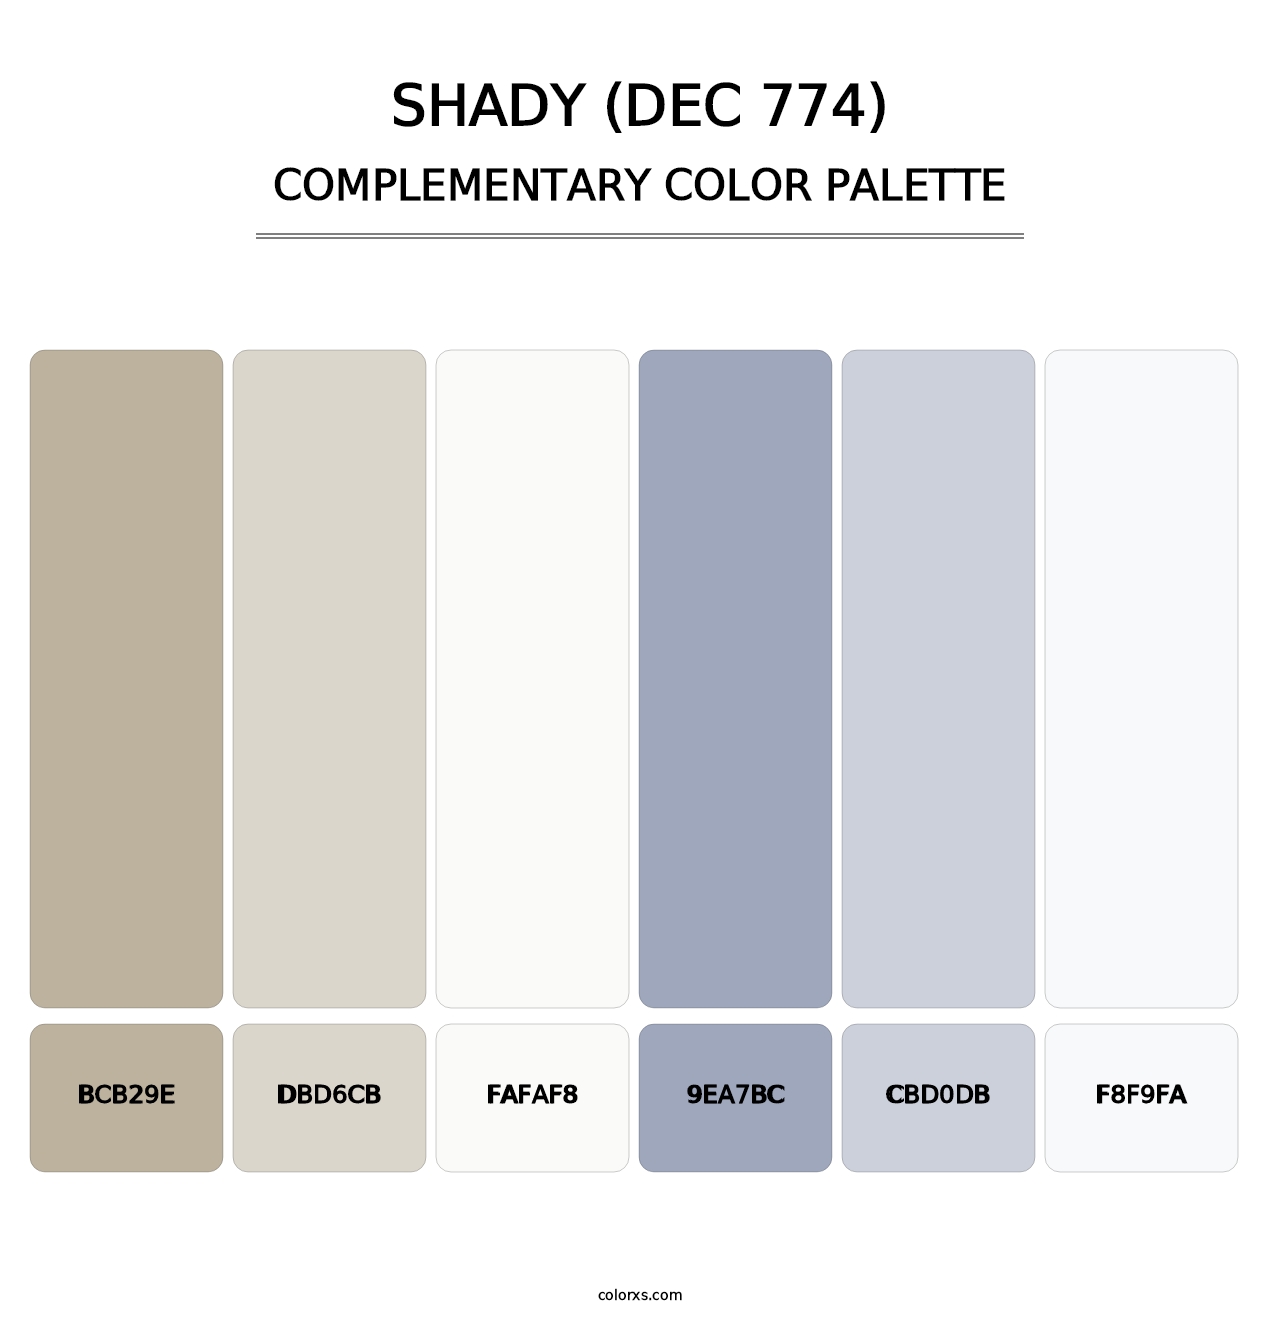 Shady (DEC 774) - Complementary Color Palette